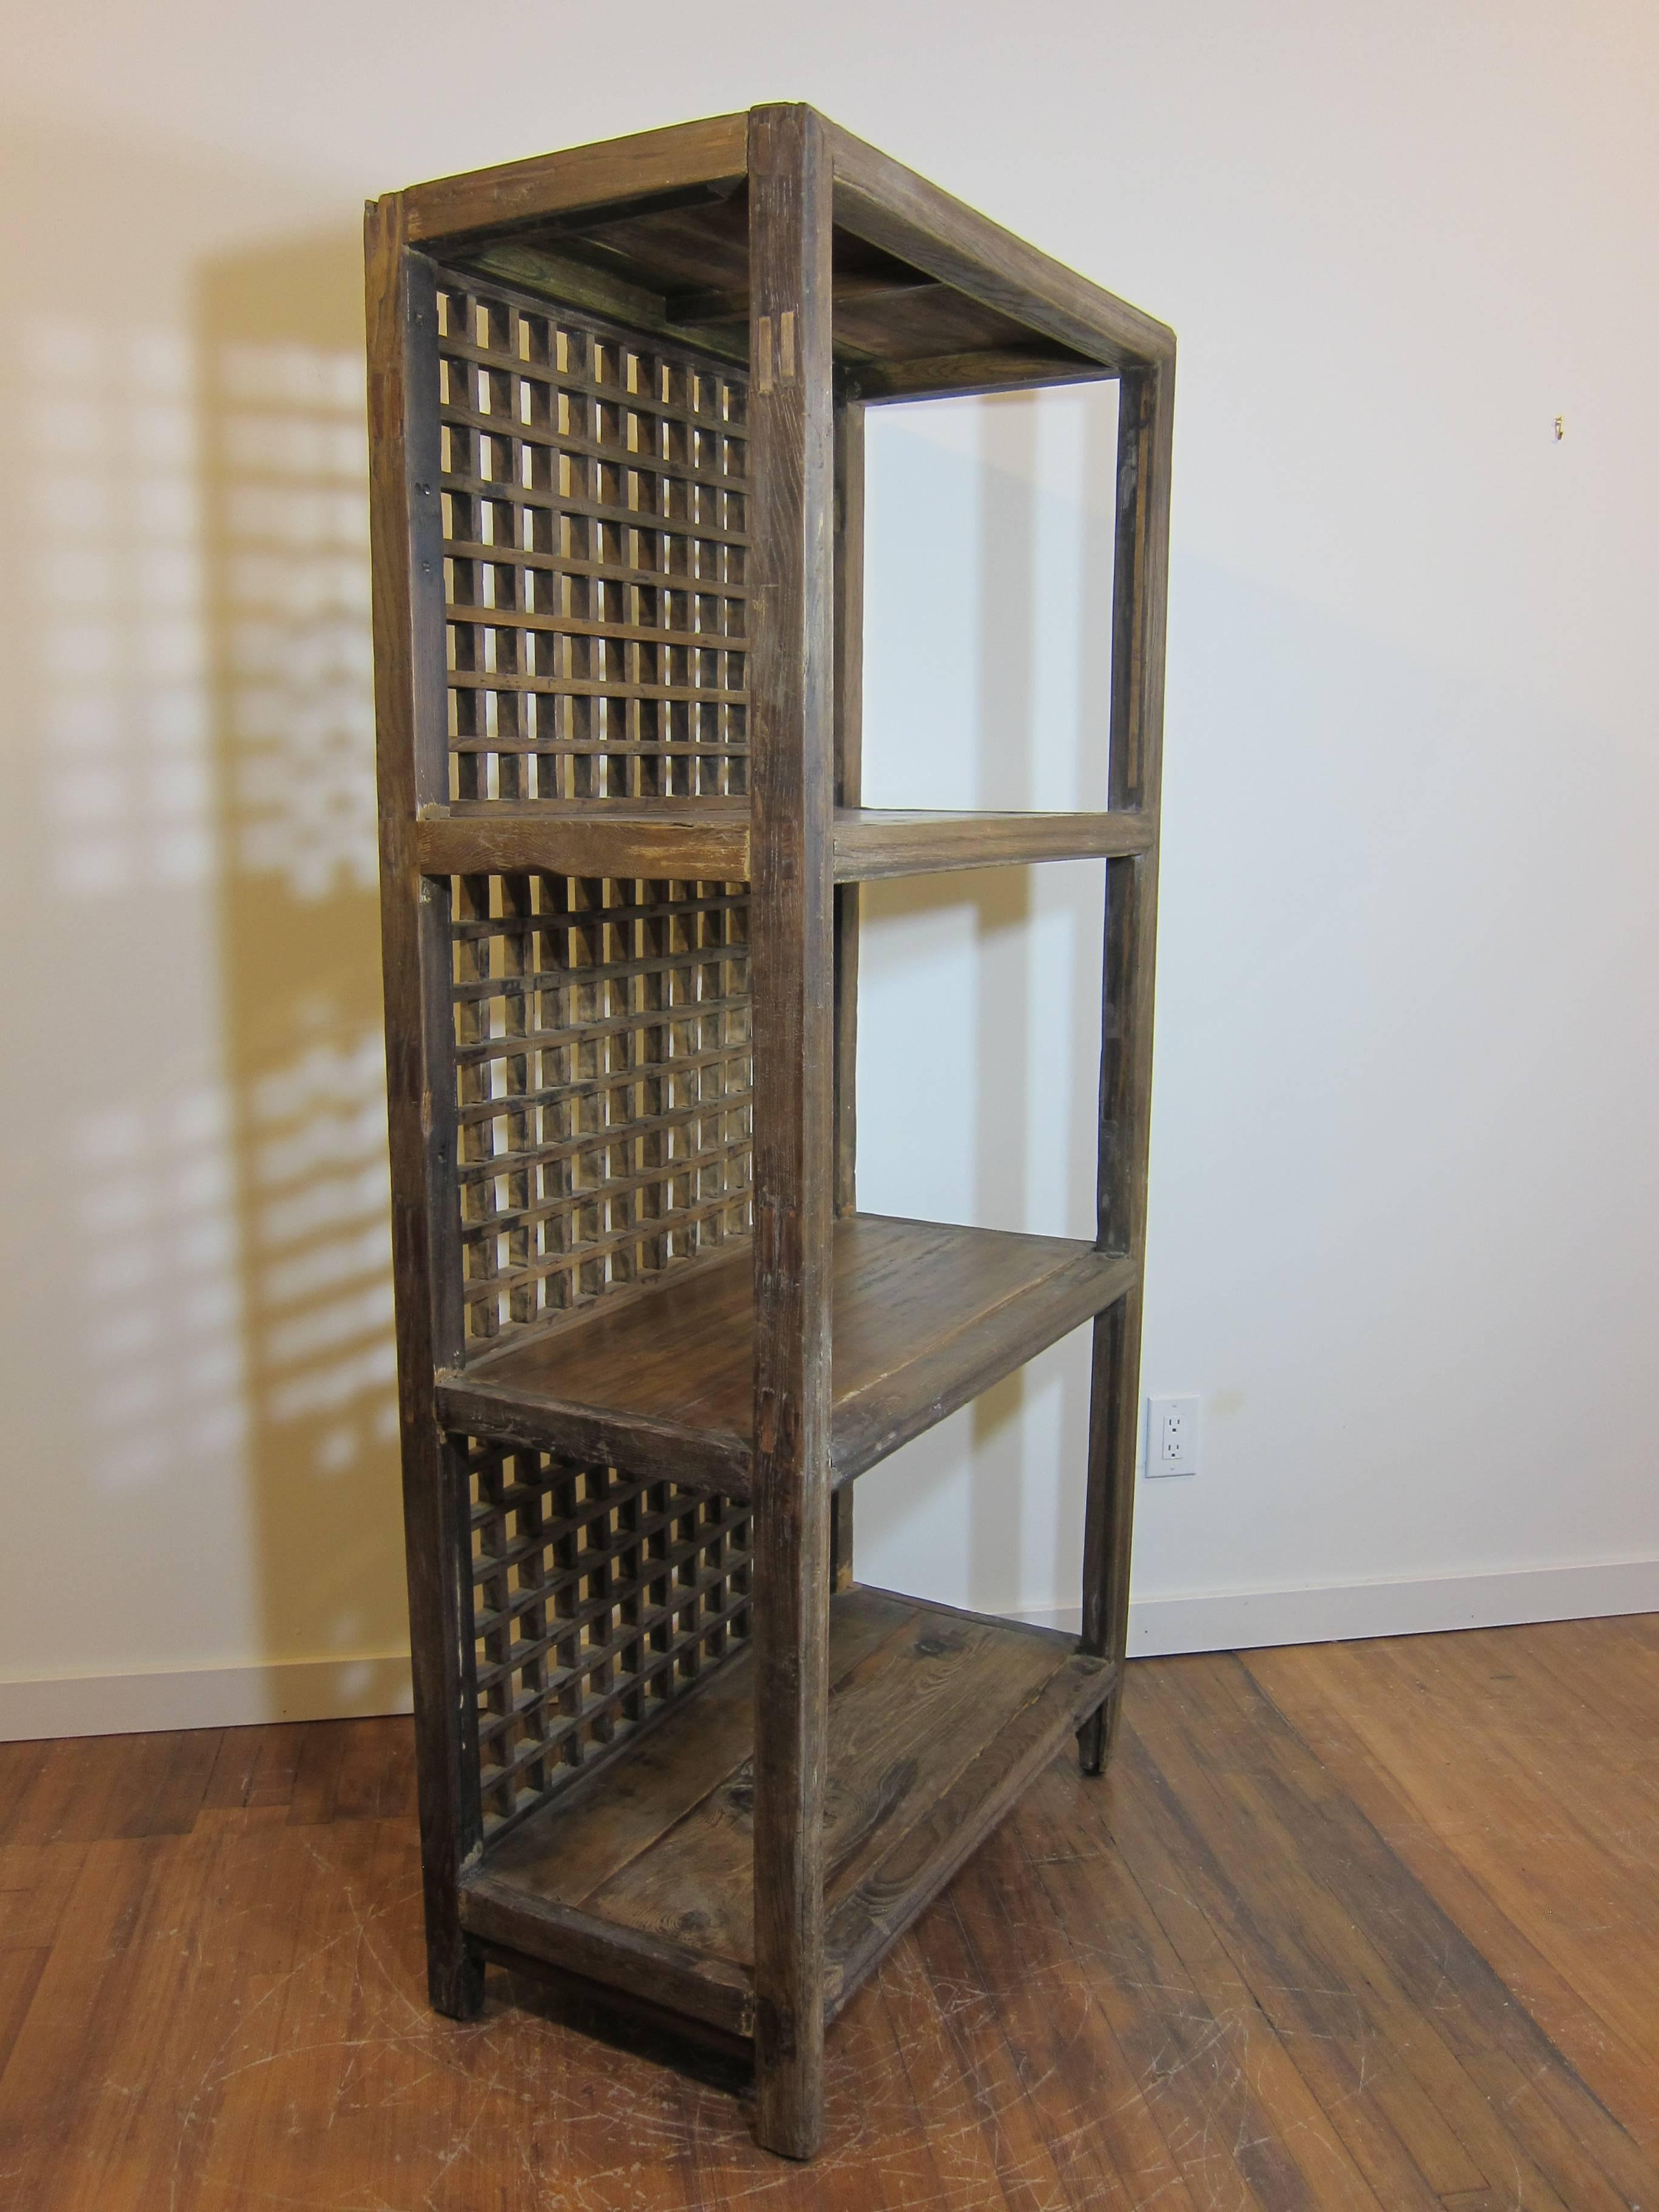 Antique rustic bookcase made of elm wood. Having Lattice style screened back. The elm wood is natural showing ware and age. In good condition. Wonderful rustic piece that will warm any setting.  This is Rustic case piece having exposed wood finish.  